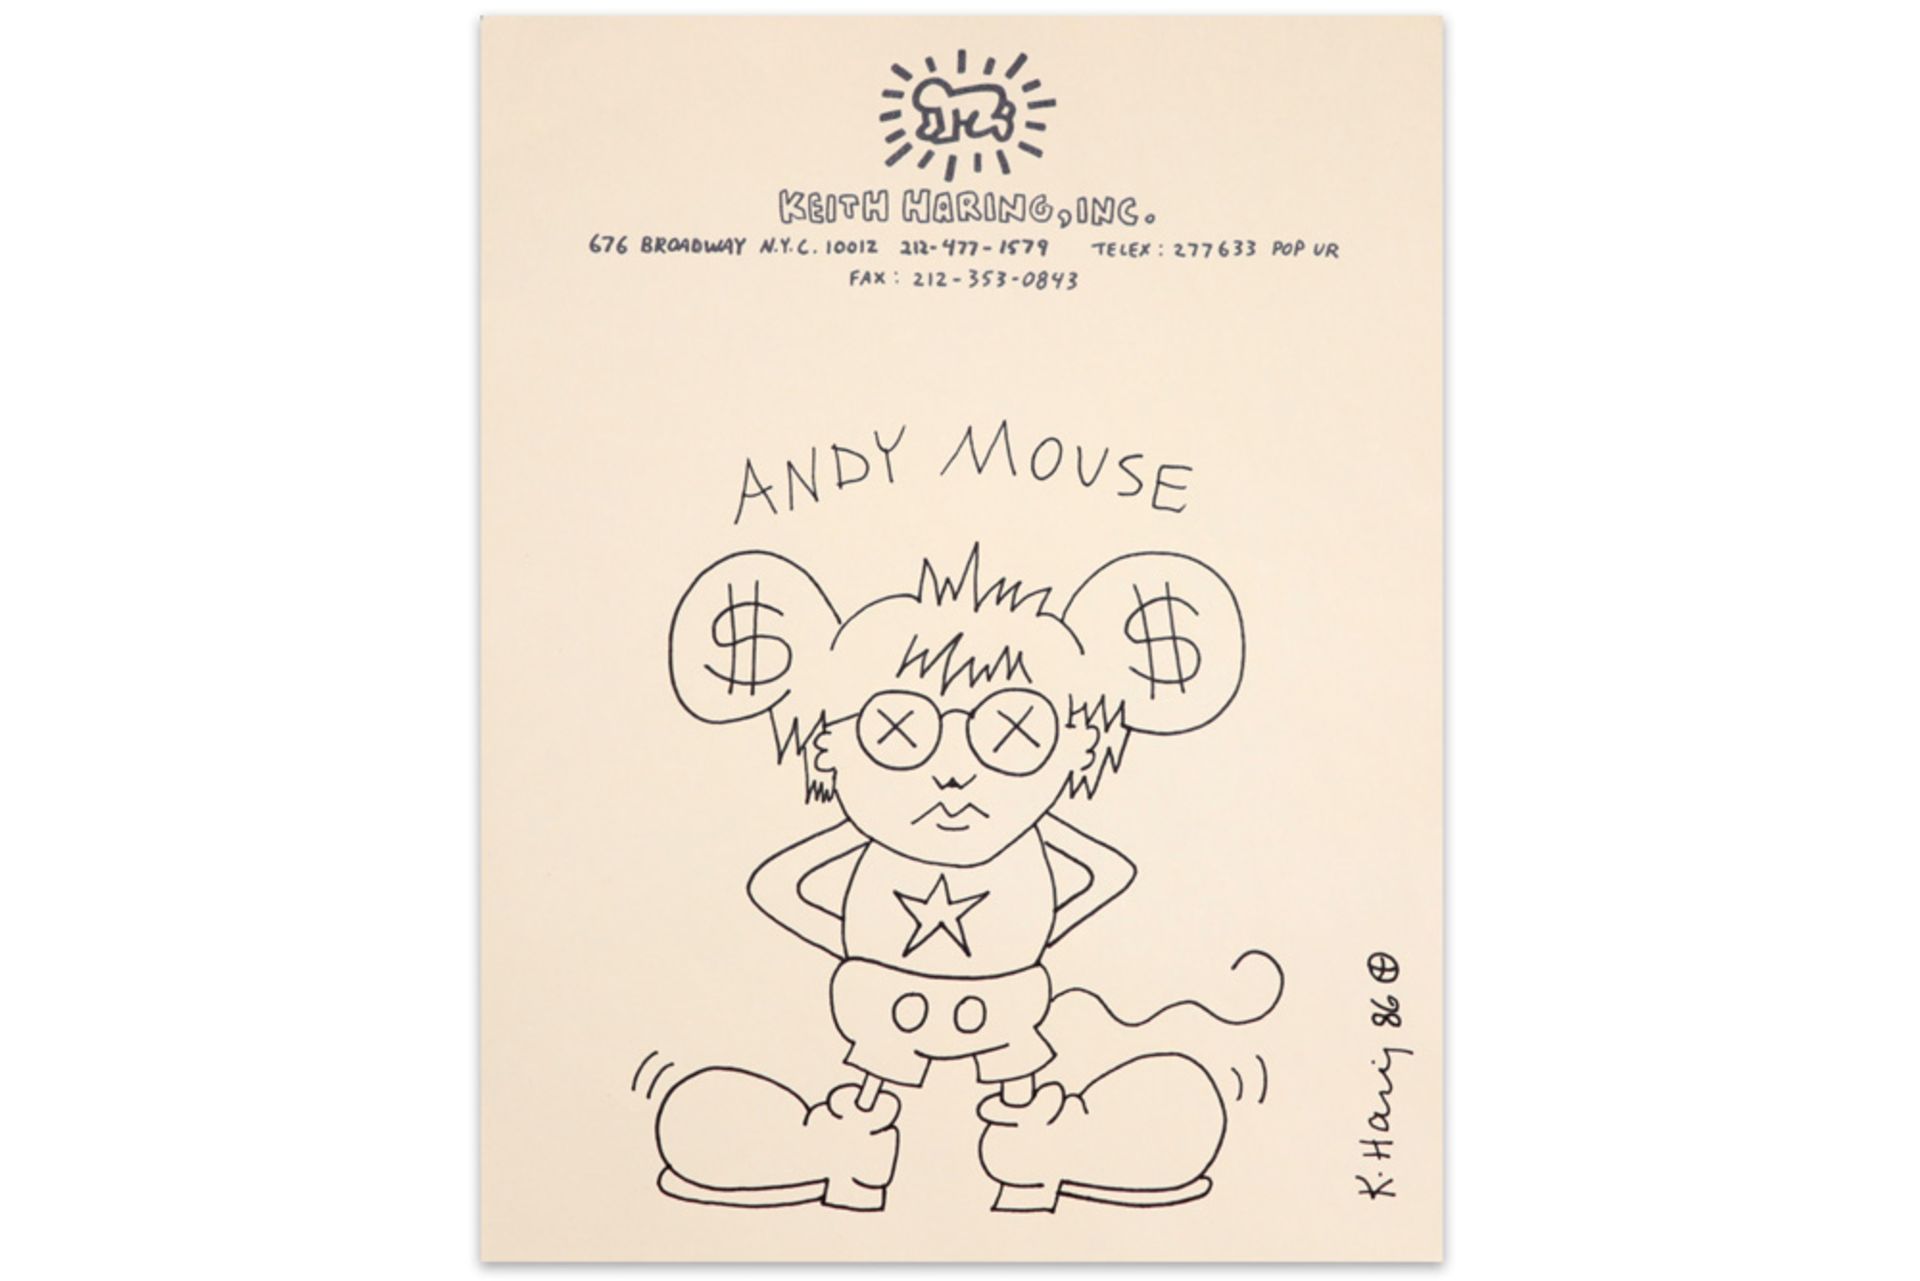 Keith Haring "Andy Mouse" drawing on writing paper of "The Estate" - signed and dated (19)86 ||